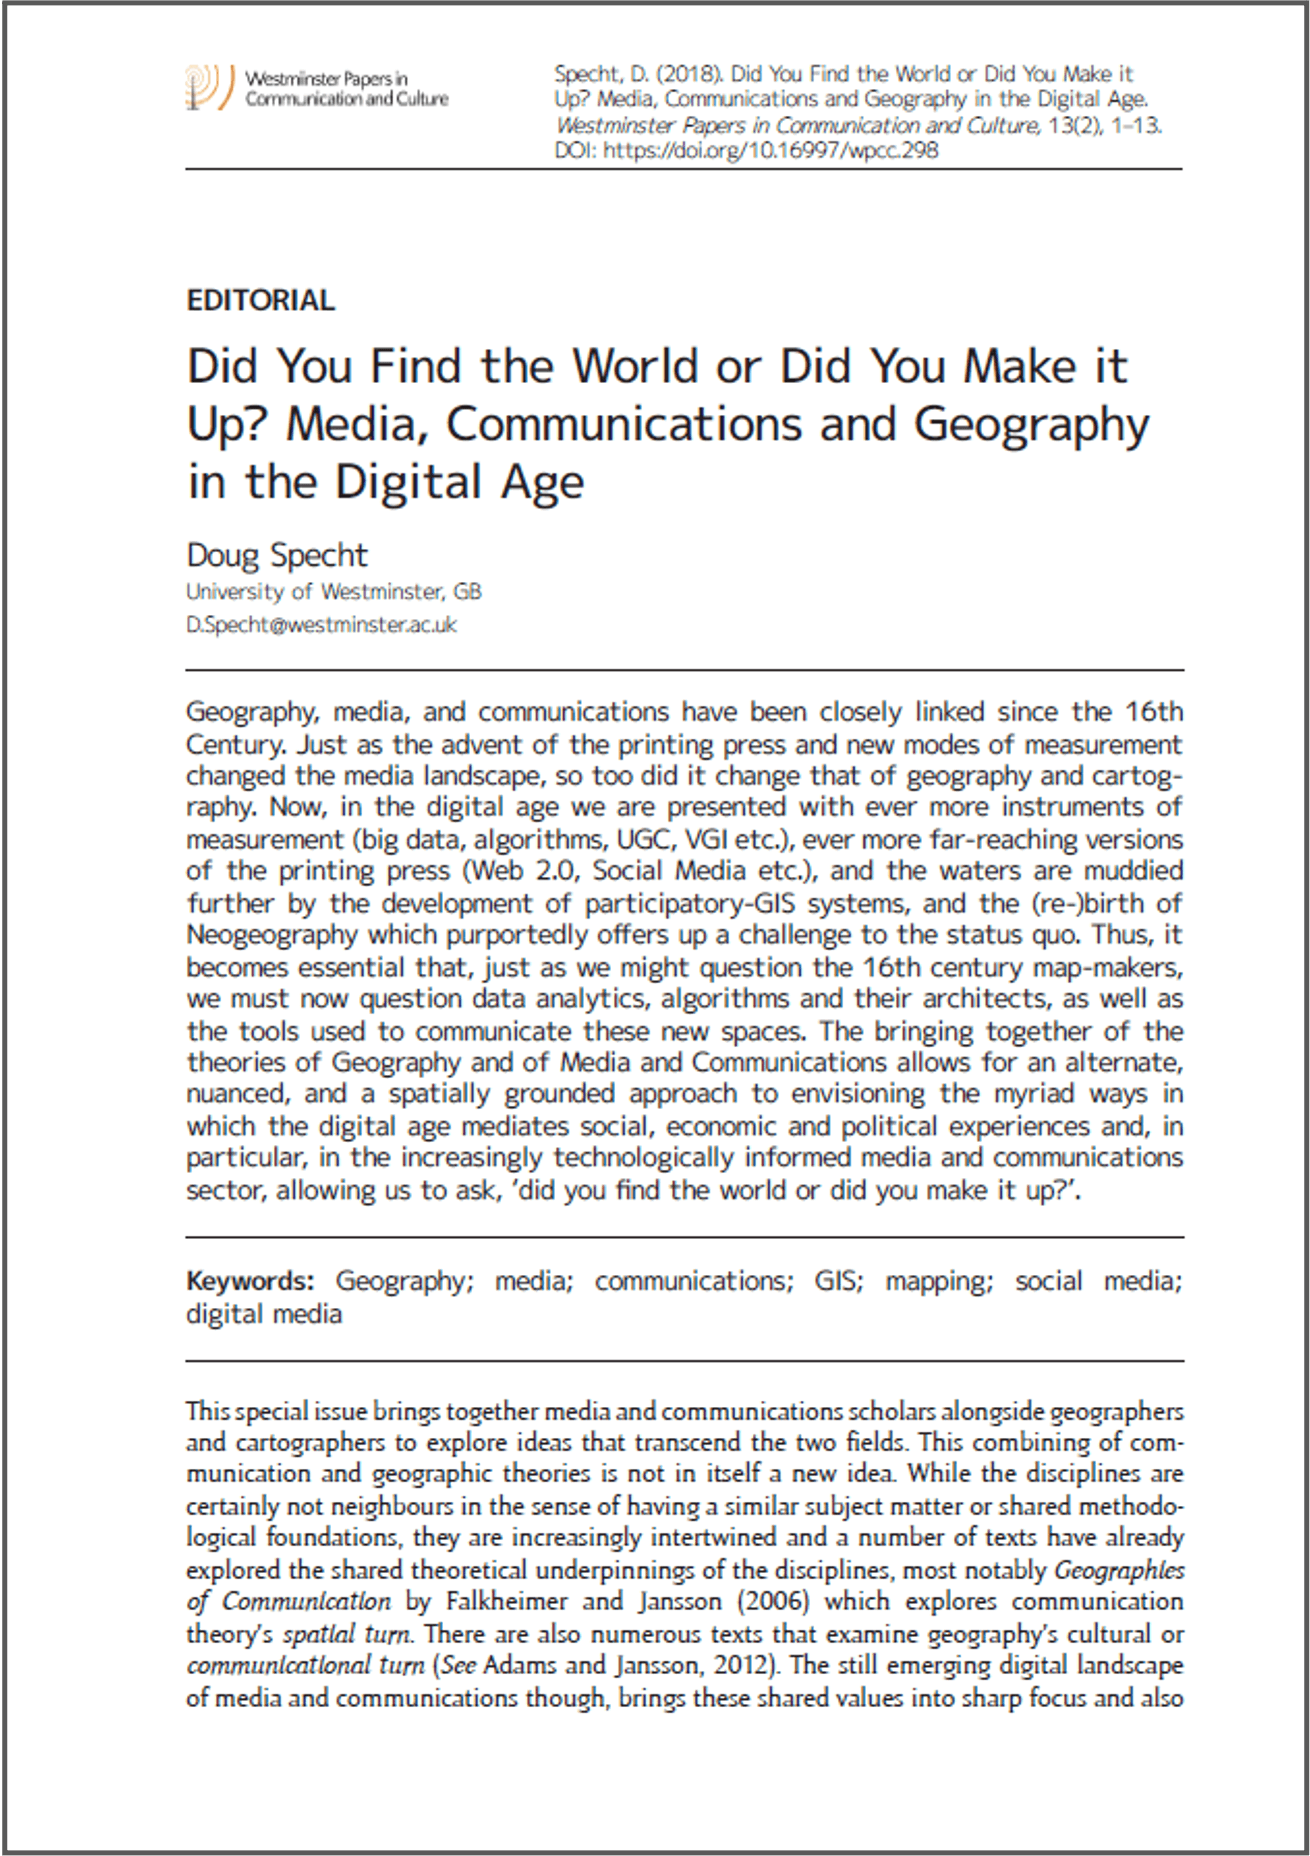  Did you find the world or did you make it up?: Geography, Communications and the Media in the Digital Age